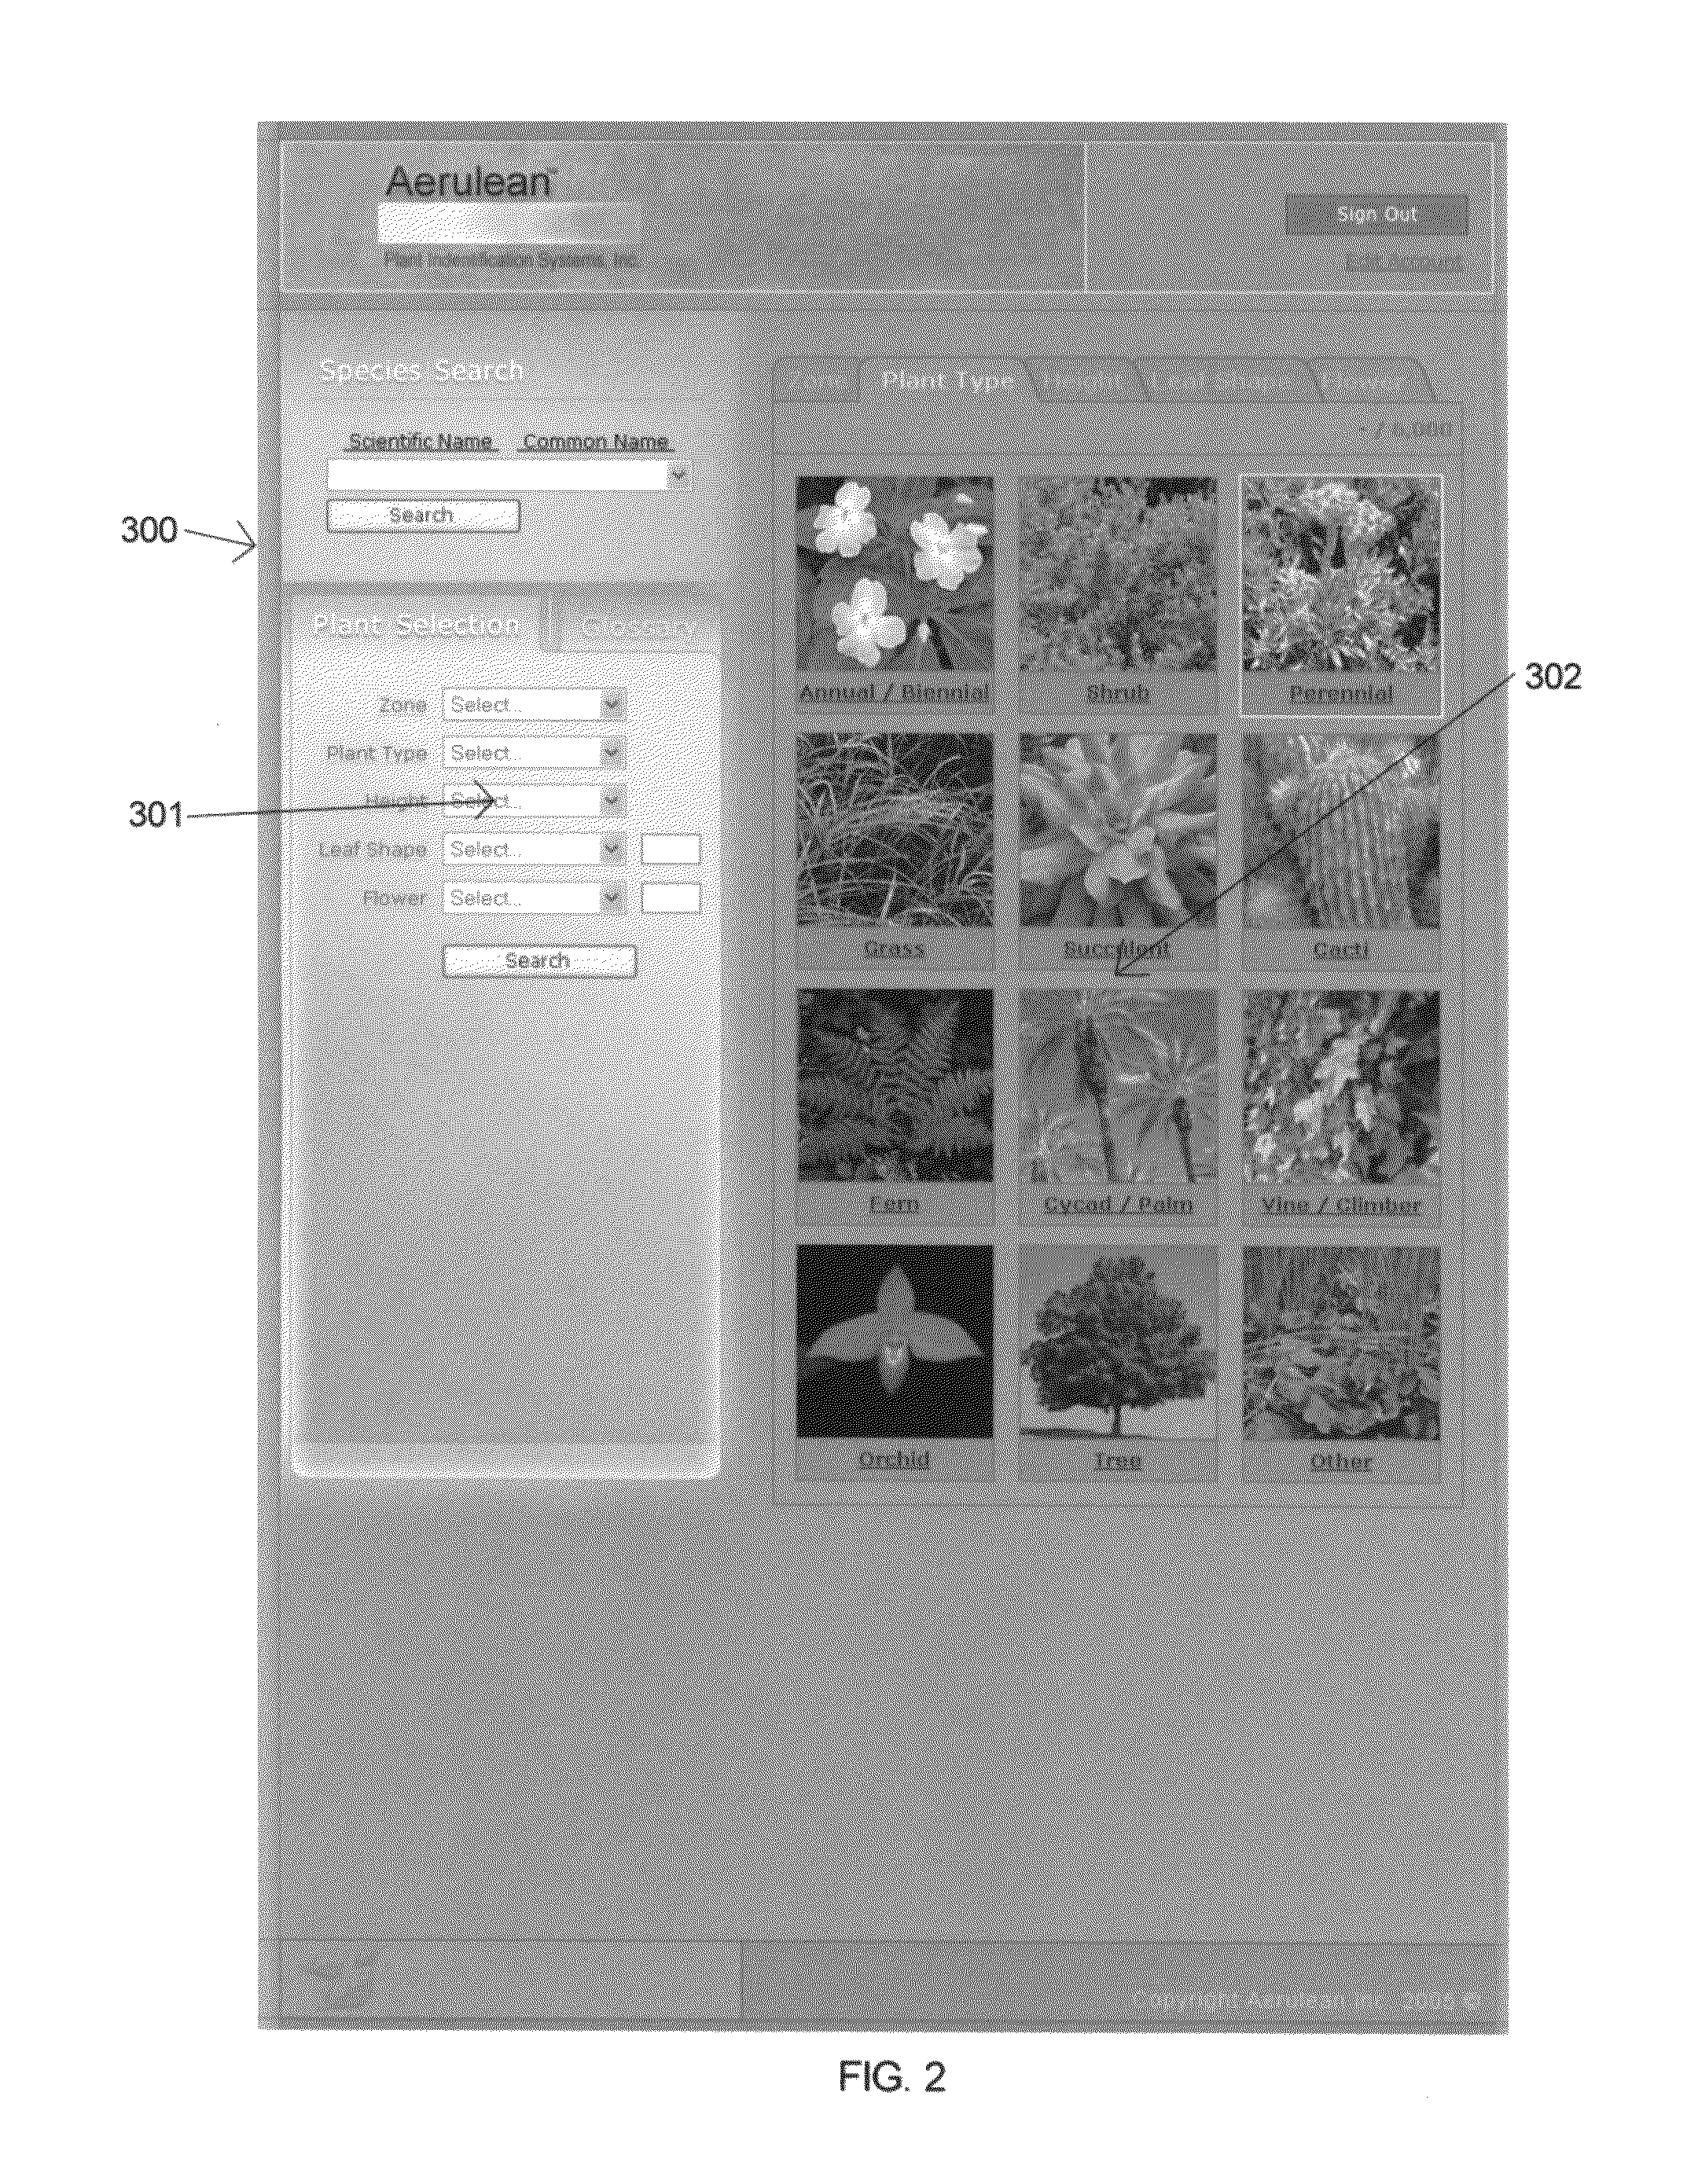 System and method for plant selection